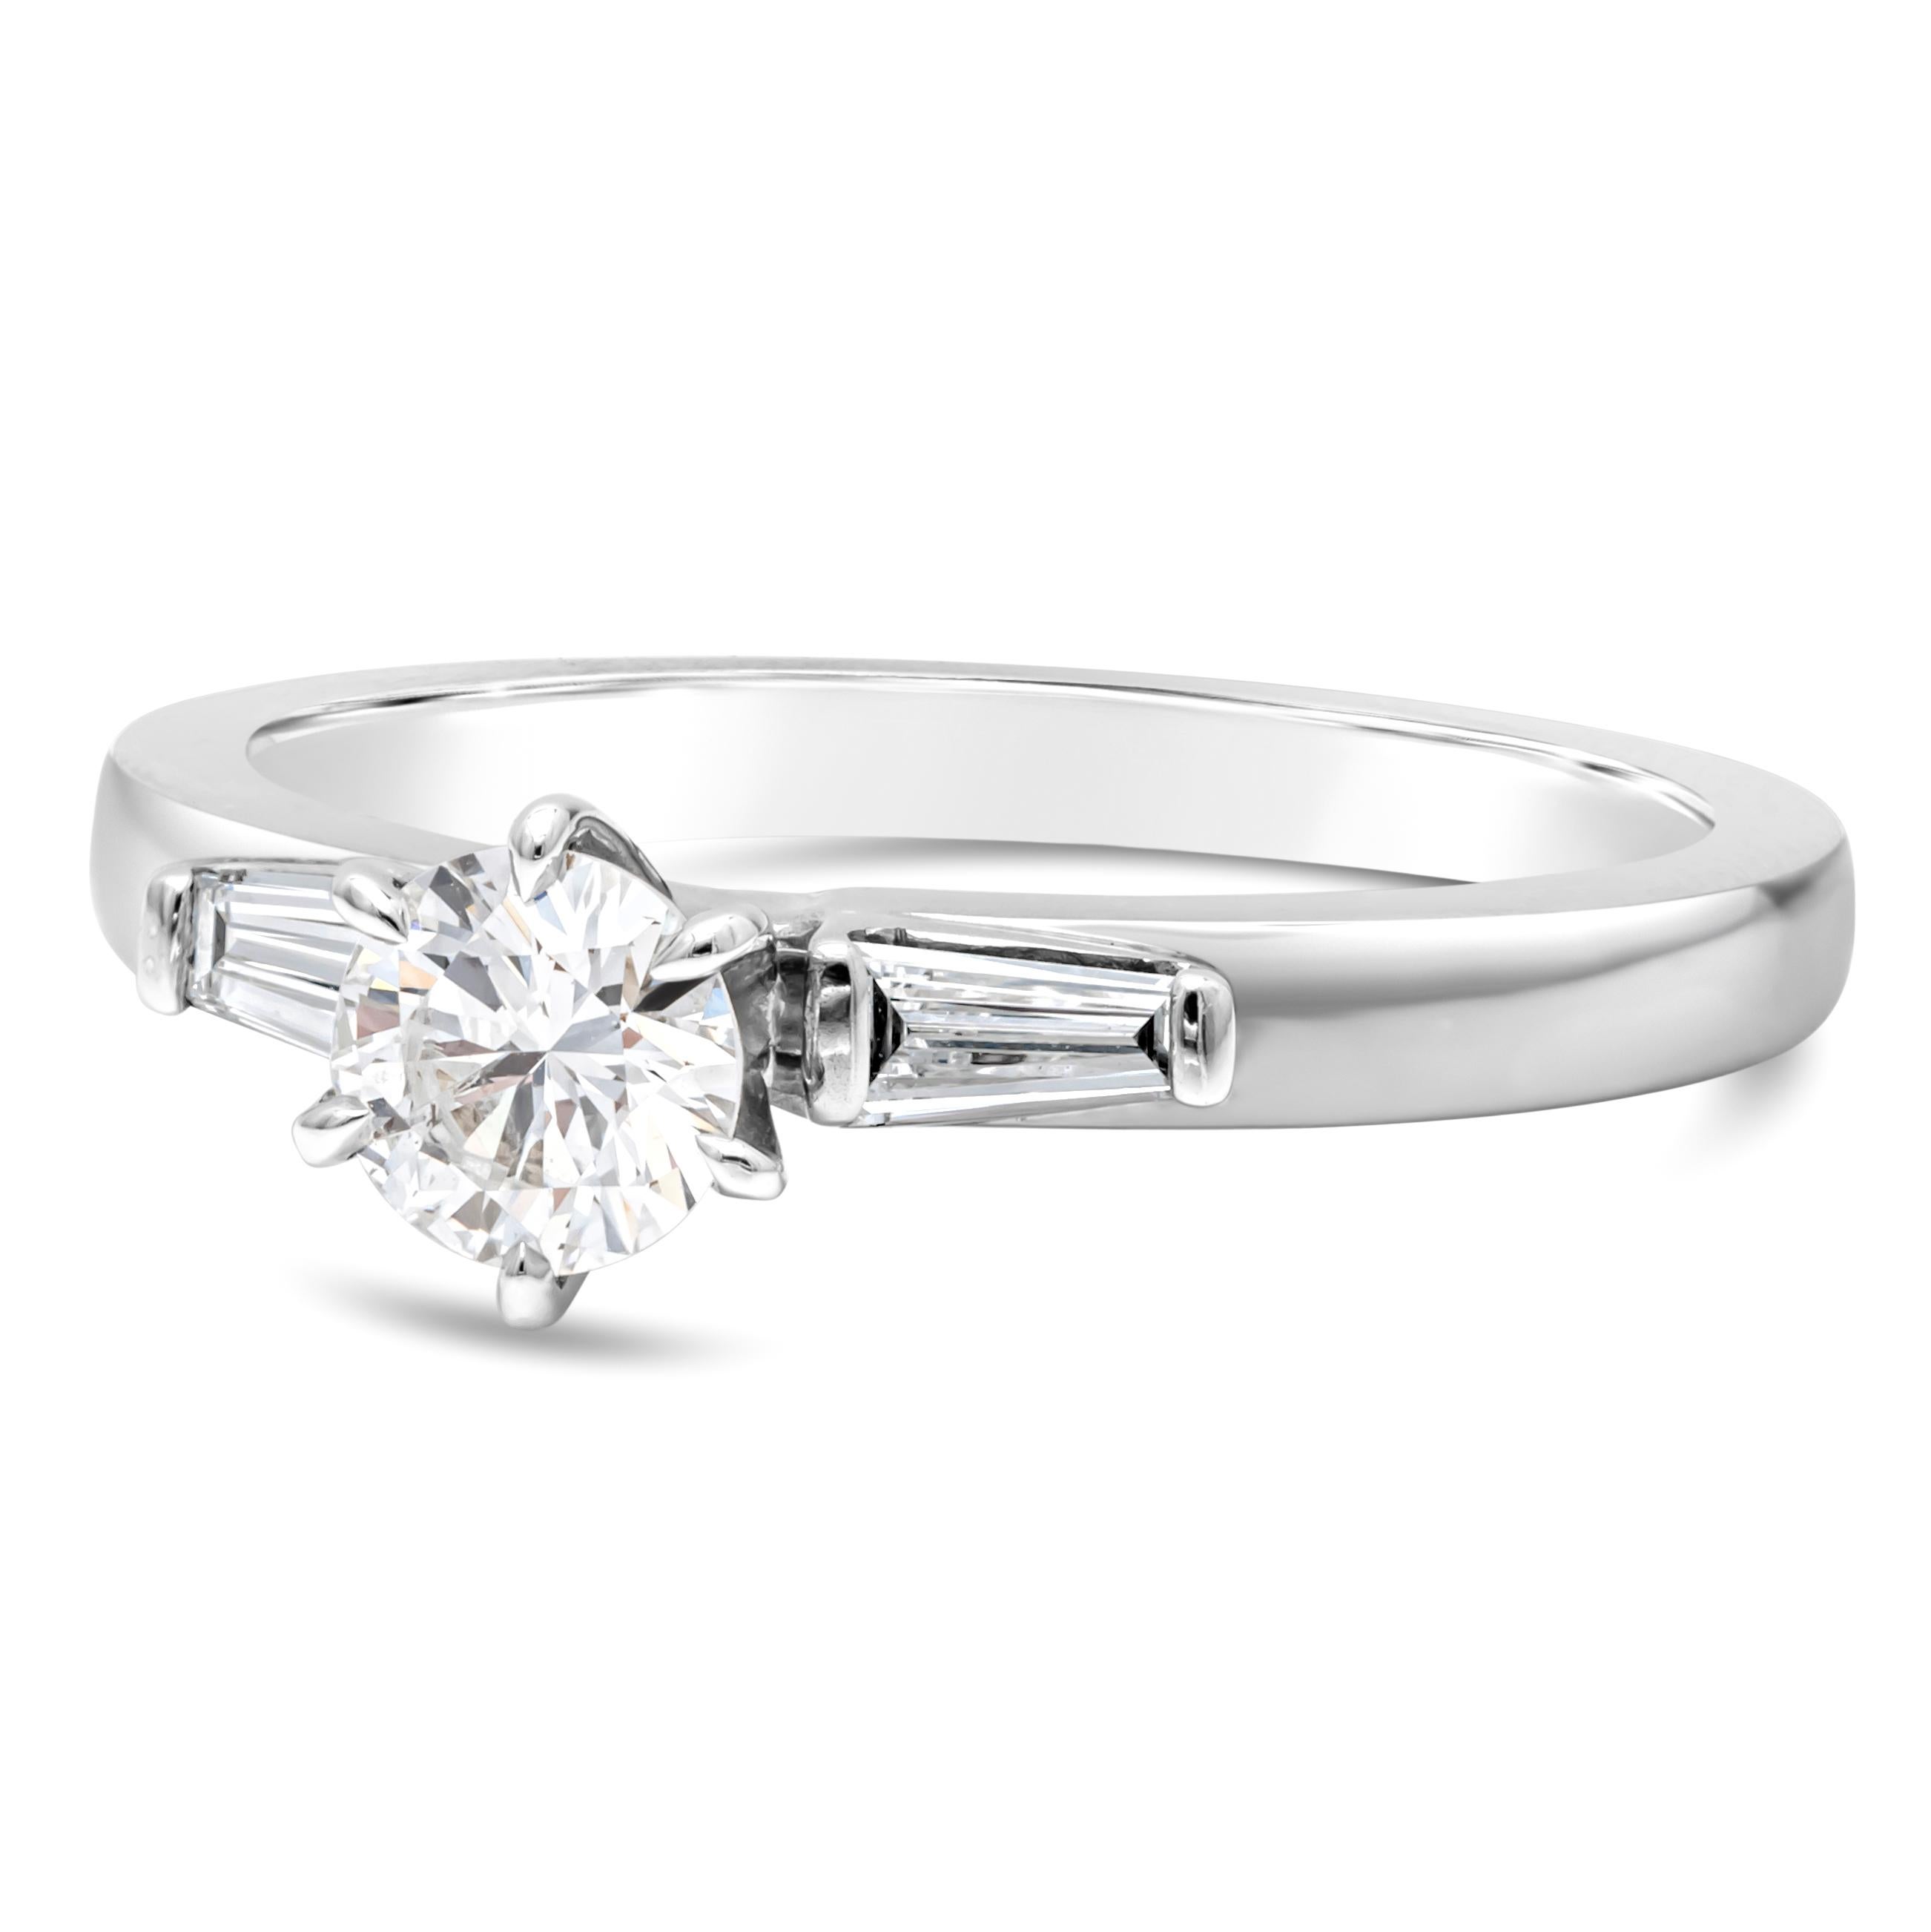 An elegant piece, showcasing a vibrant 0.45 carat round brilliant cut diamond certified by EGL as D color and SI1 clarity, set on a six prong basket setting. Accented with tapered baguette diamonds weighing 0.18 carat total. Finely made with 18K